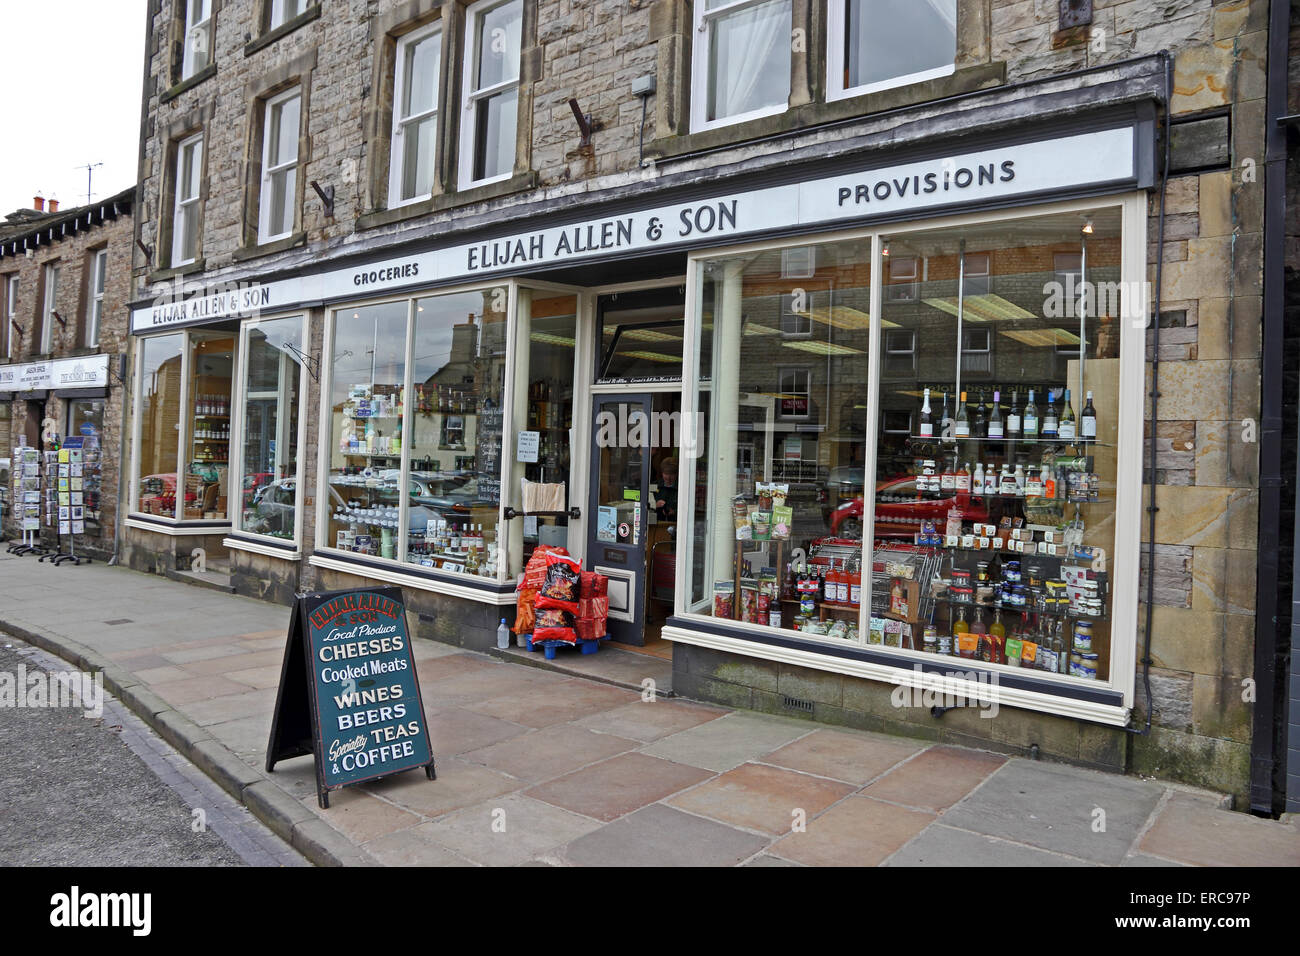 Ellijah Allen & Son, traditional food and drink shop, Hawes Stock Photo